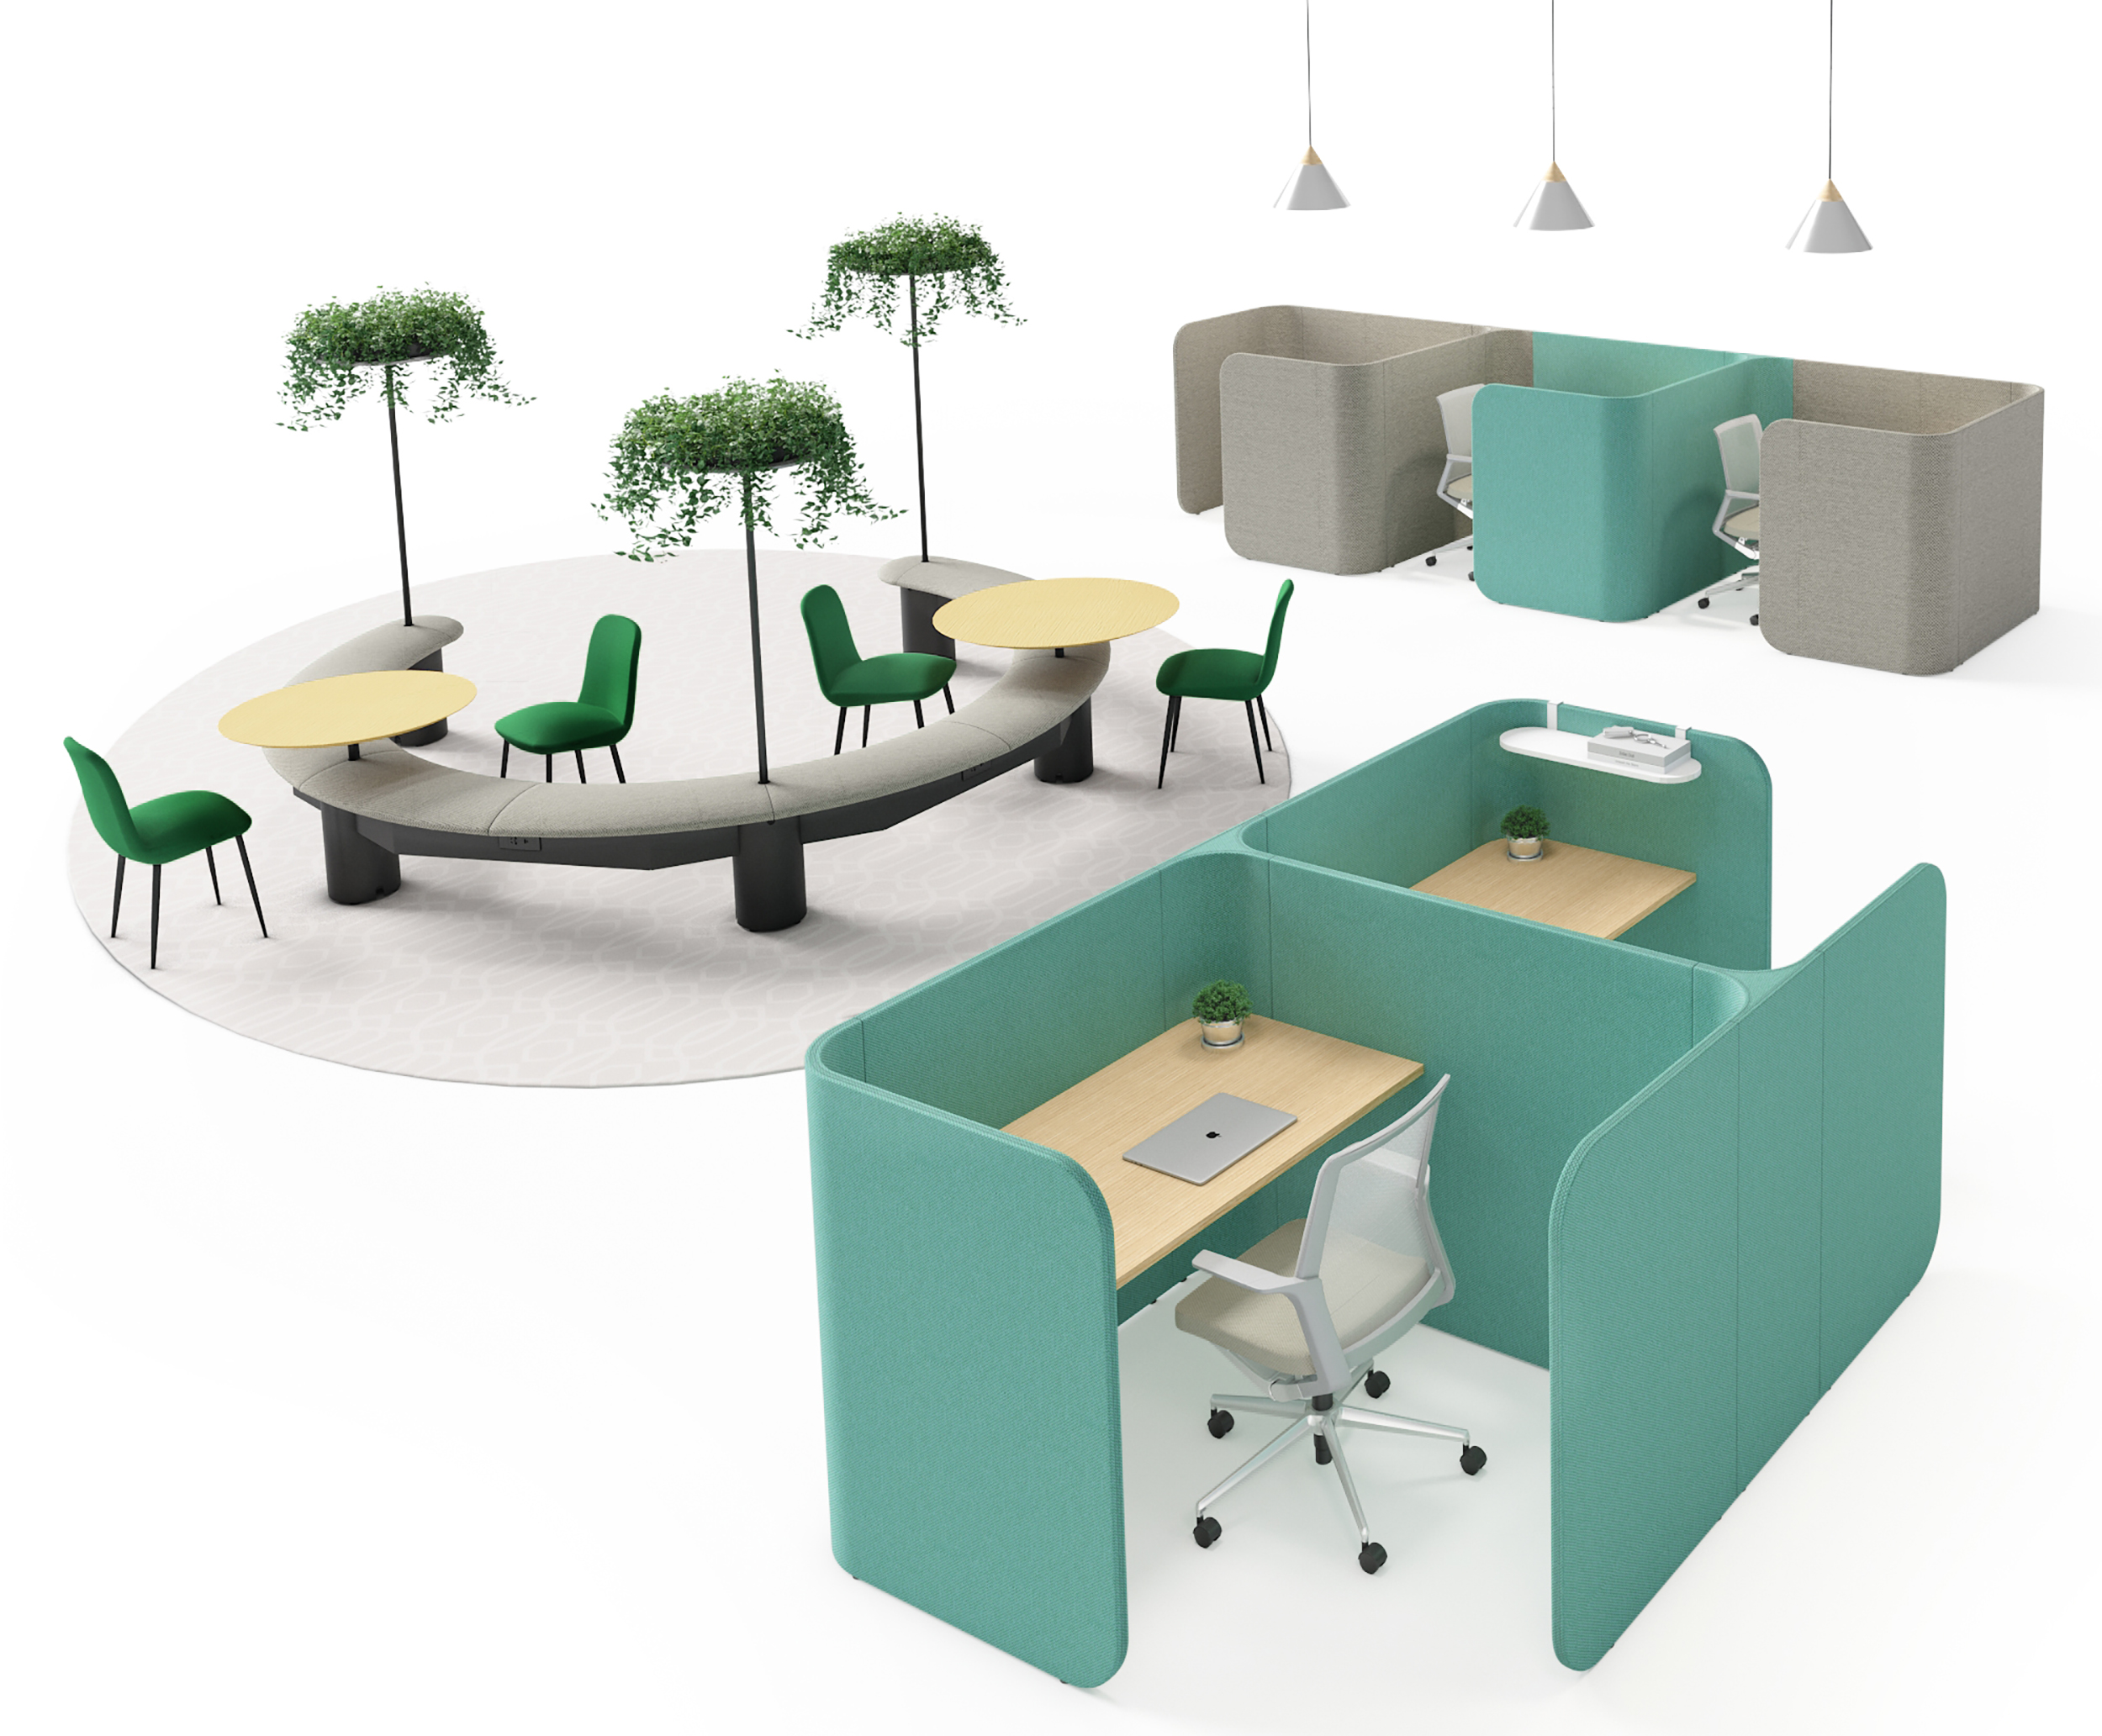 Design Tools | Lamex Office Furniture | Official Website of Lamex